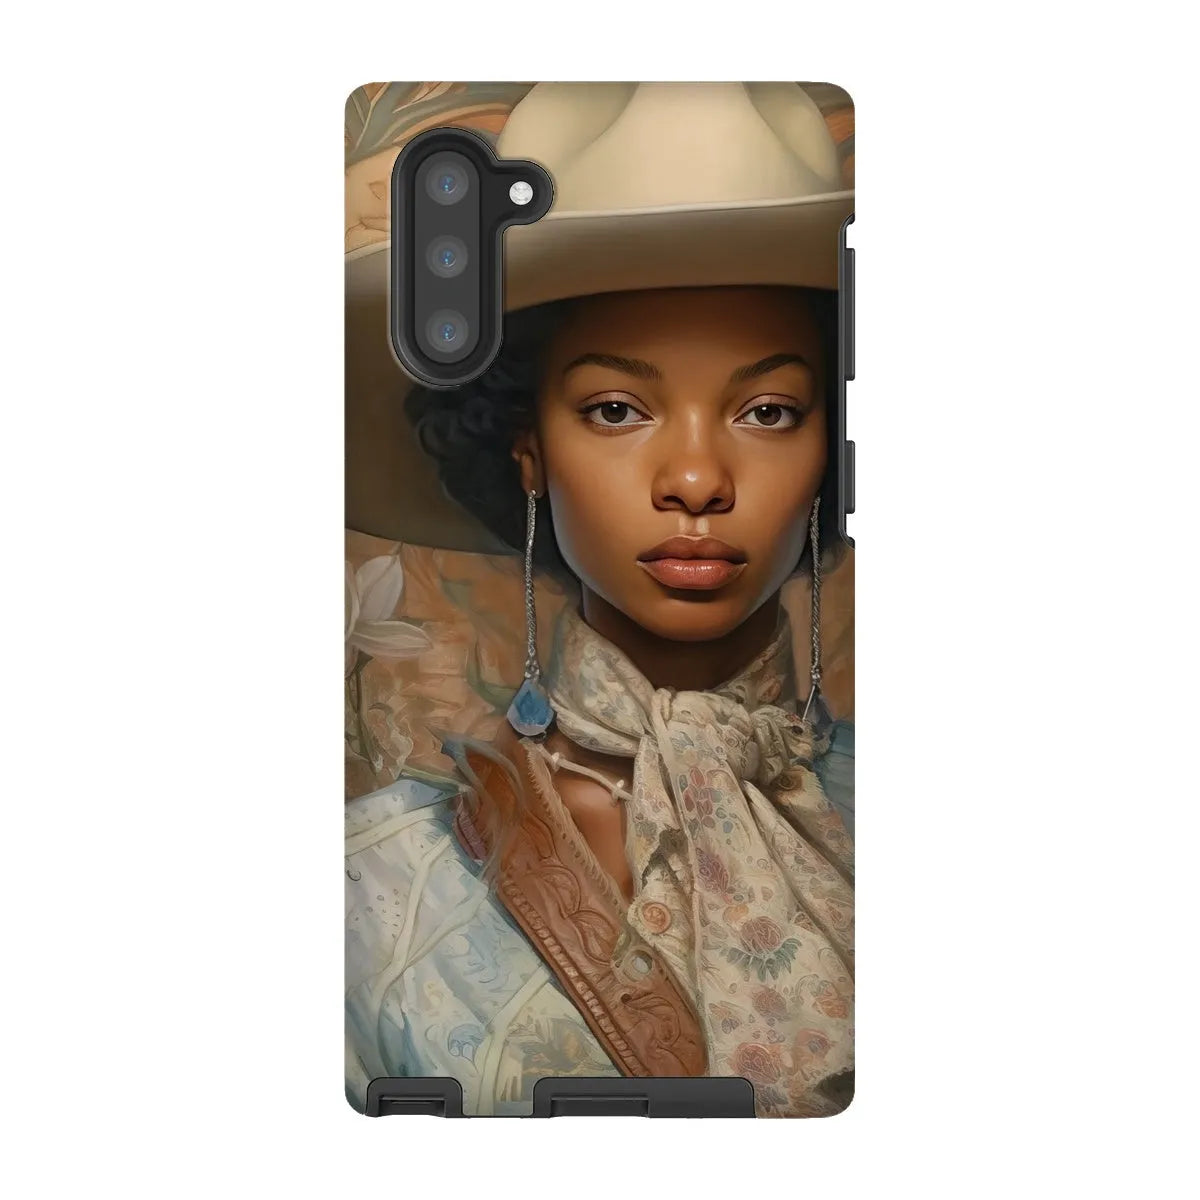 Imani The Lesbian Cowgirl - Sapphic Art Phone Case - Samsung Galaxy Note 10 / Matte - Mobile Phone Cases - Aesthetic Art